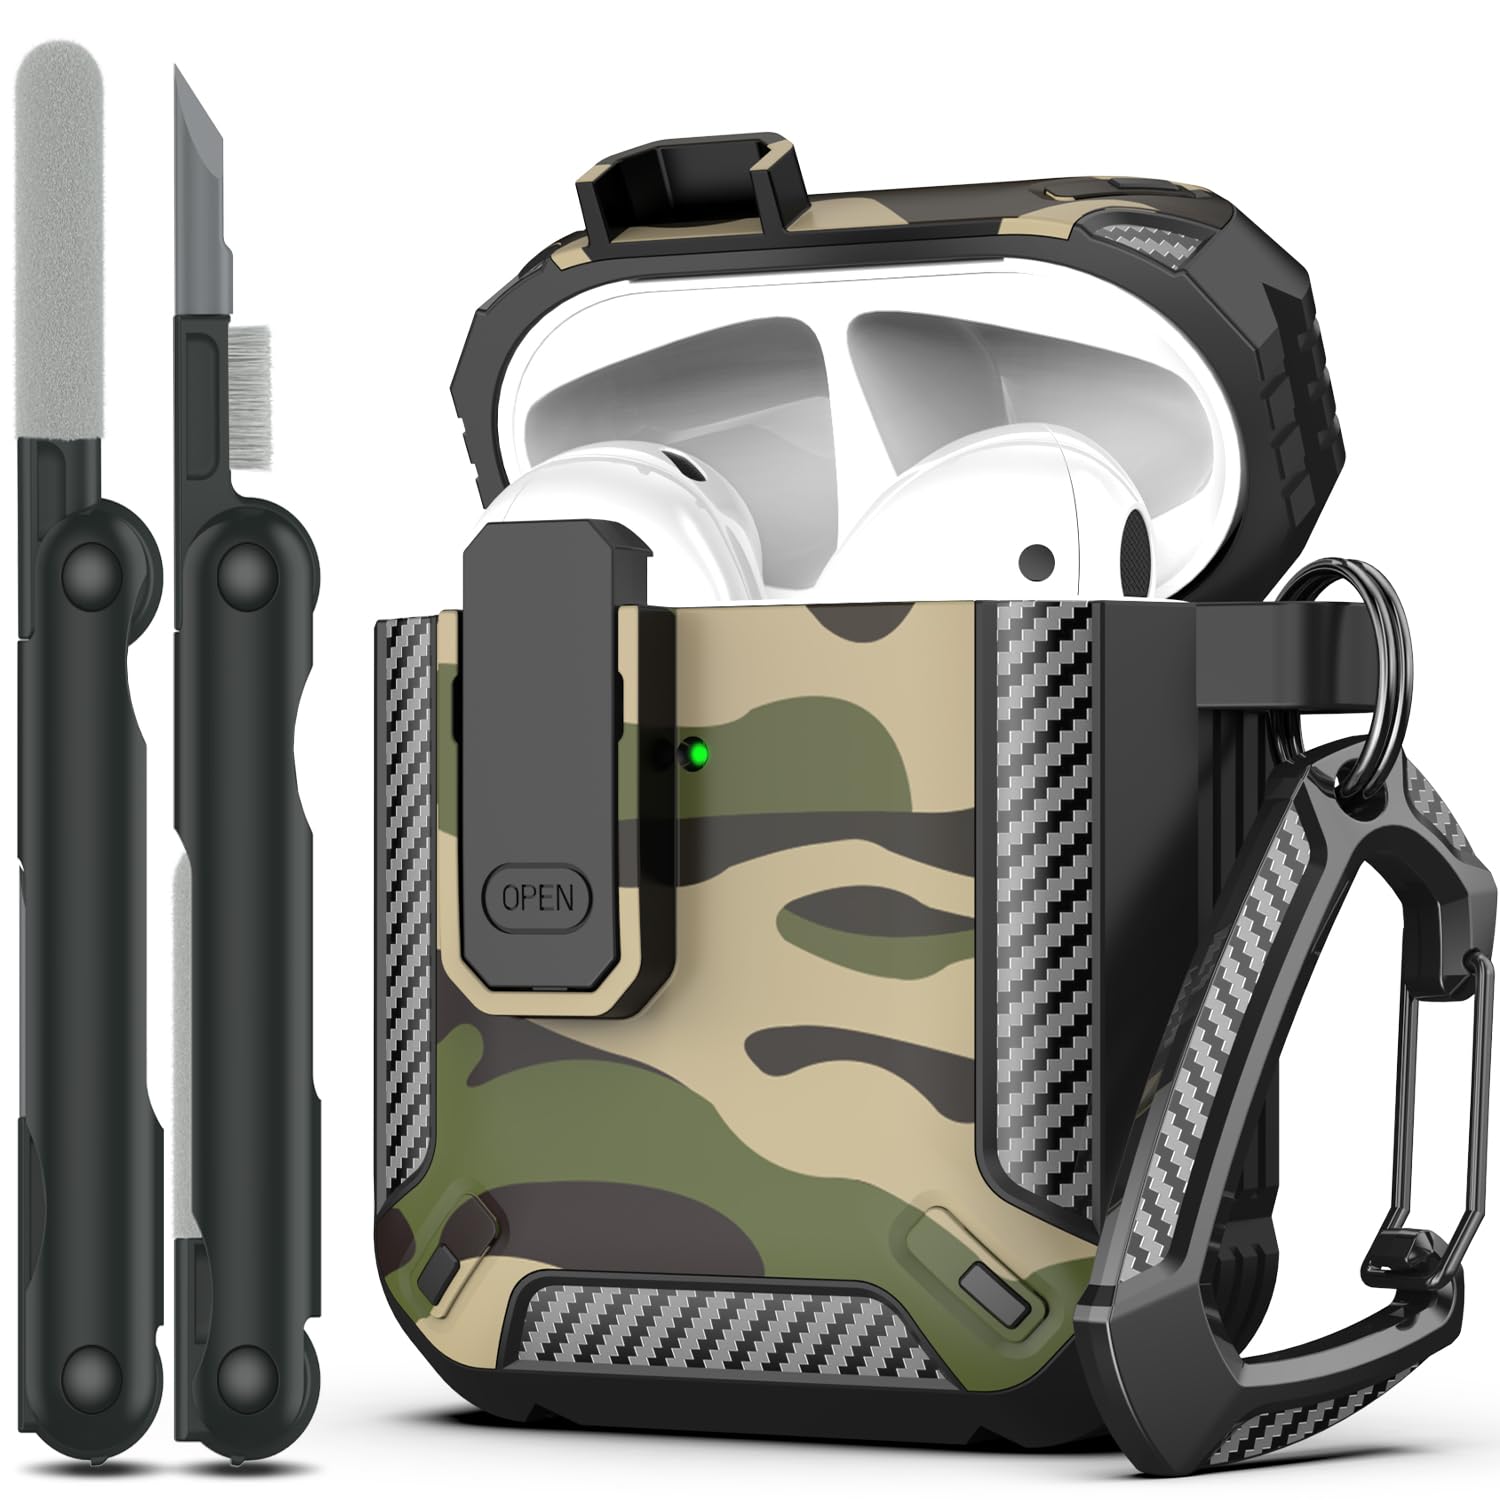 RFUNGUANGO AirPods 2nd Generation Case Cover with Cleaner Kit, Military Hard Shell Protective Armor with Lock for AirPod Gen 1&2 Charging Case, Front LED Visible,Black Camouflage - Caps Fitted